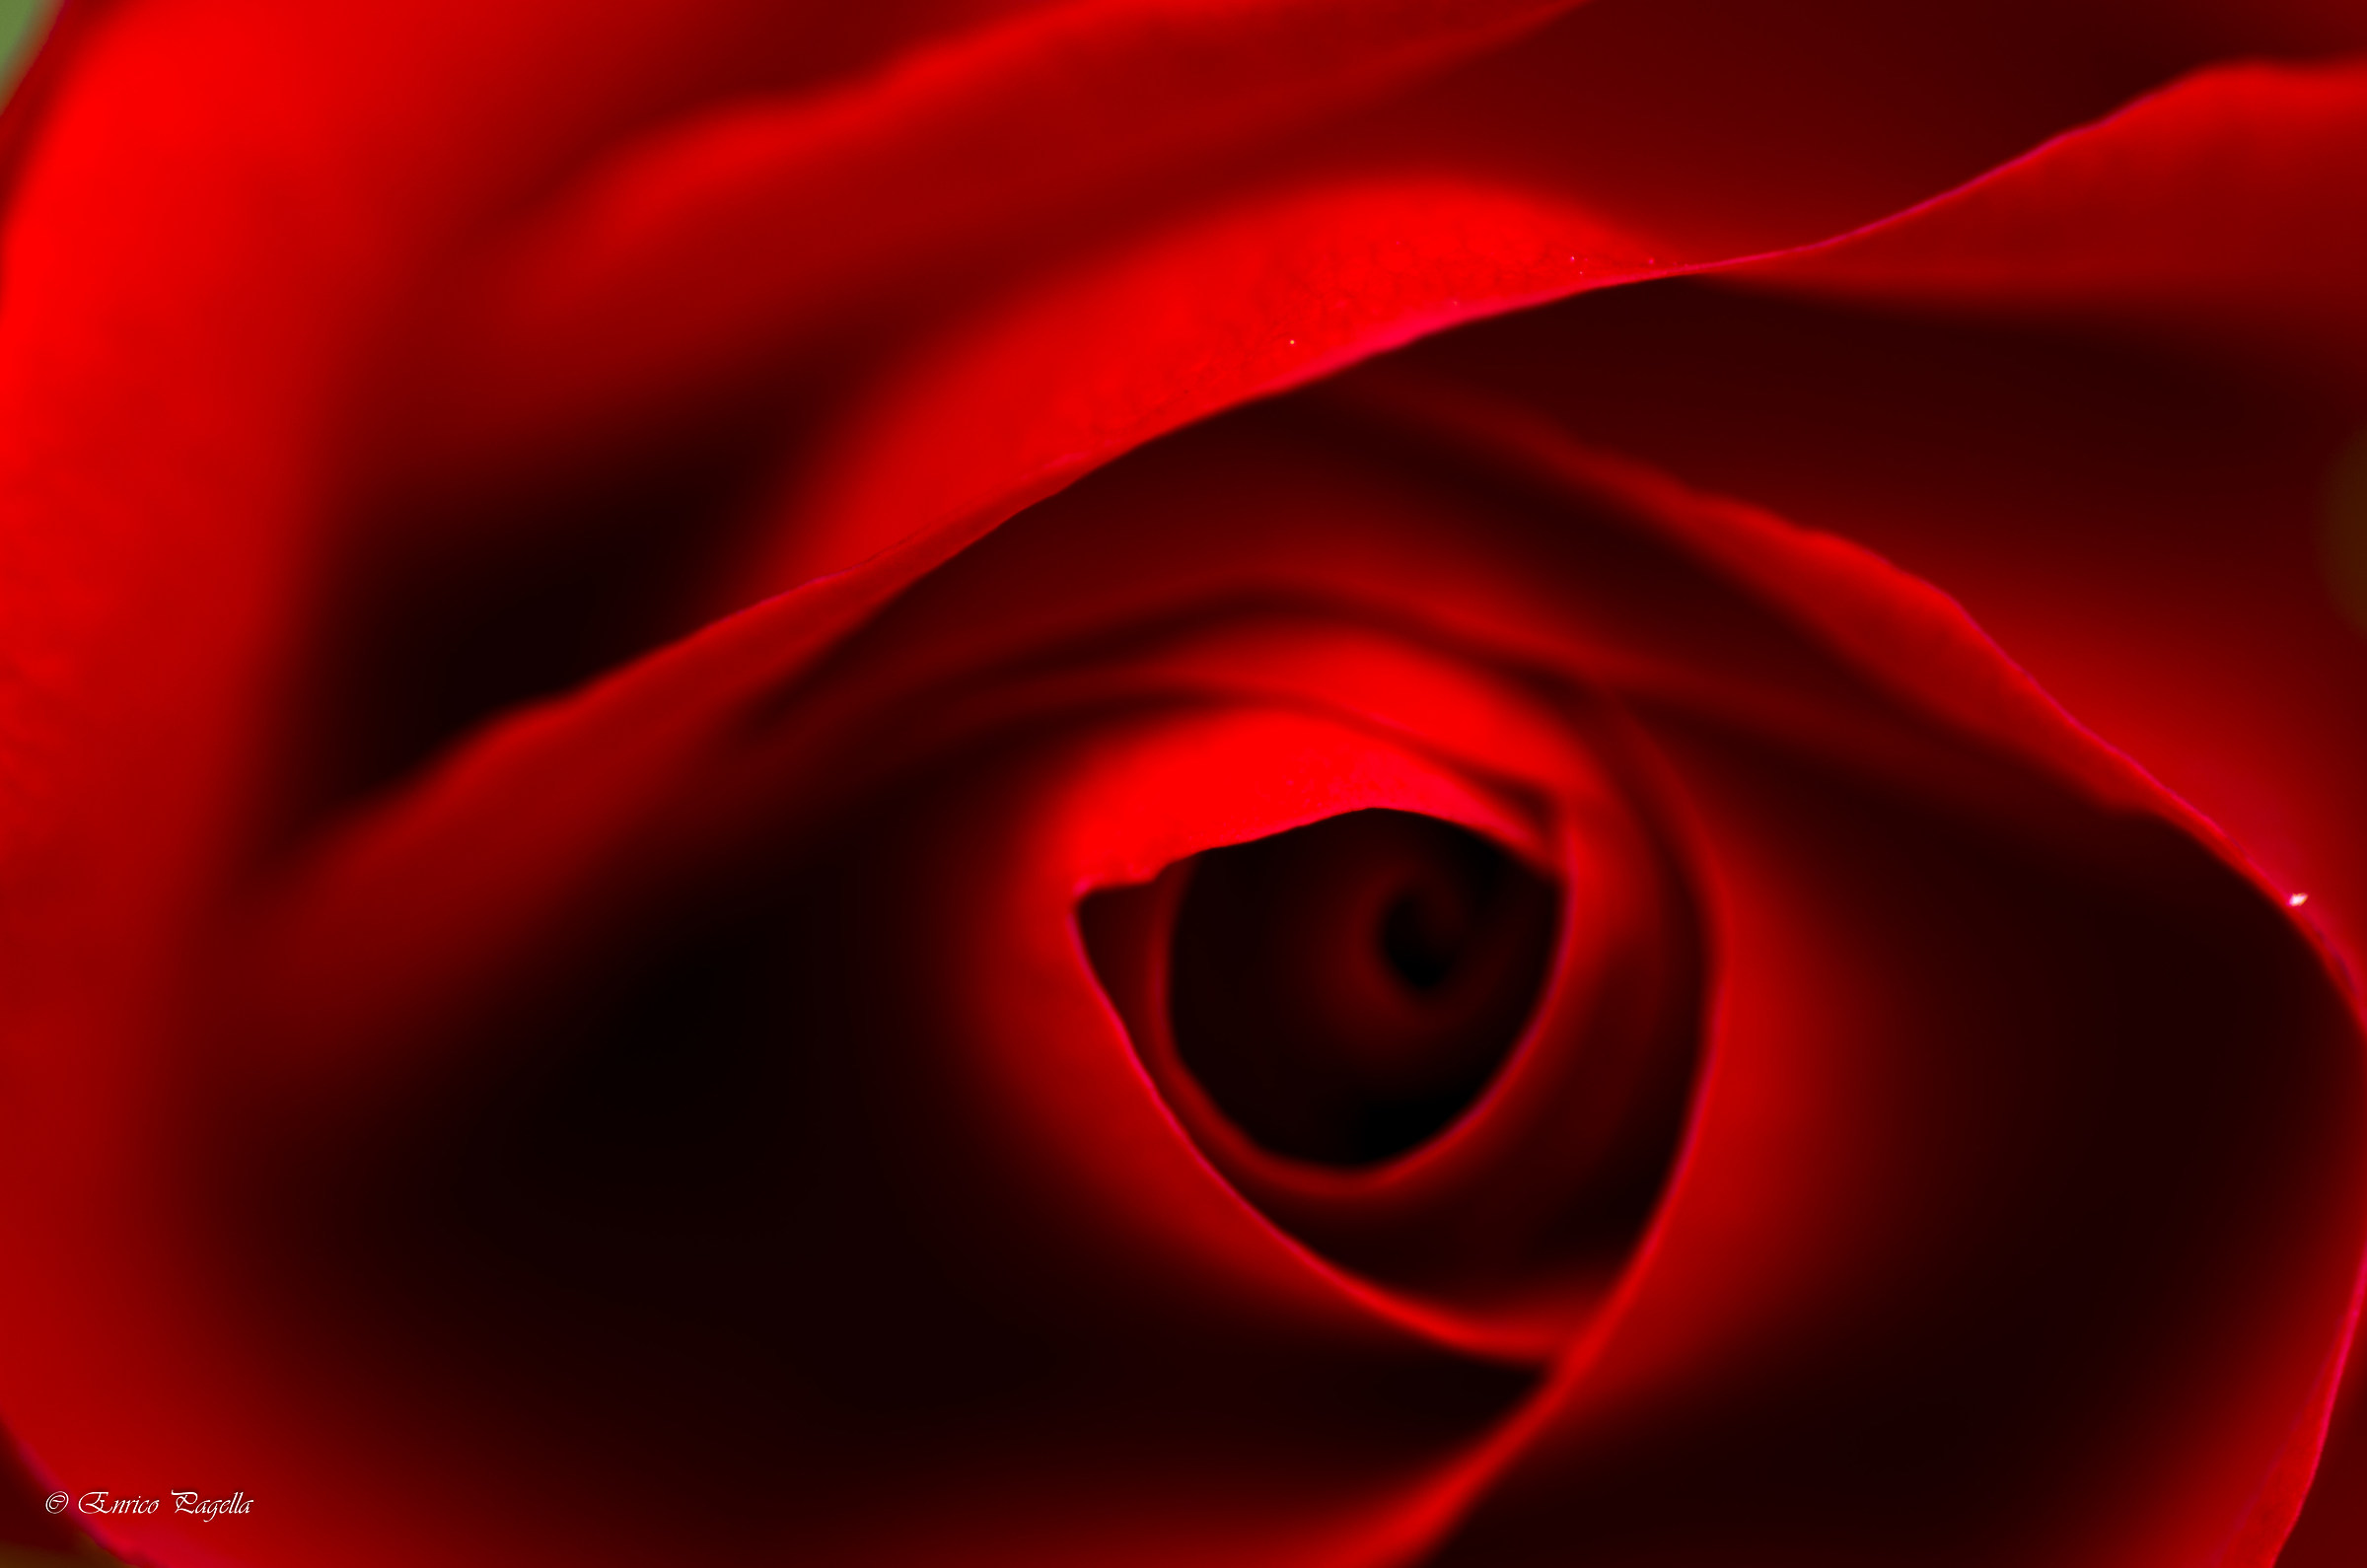 The eye of a red rose...